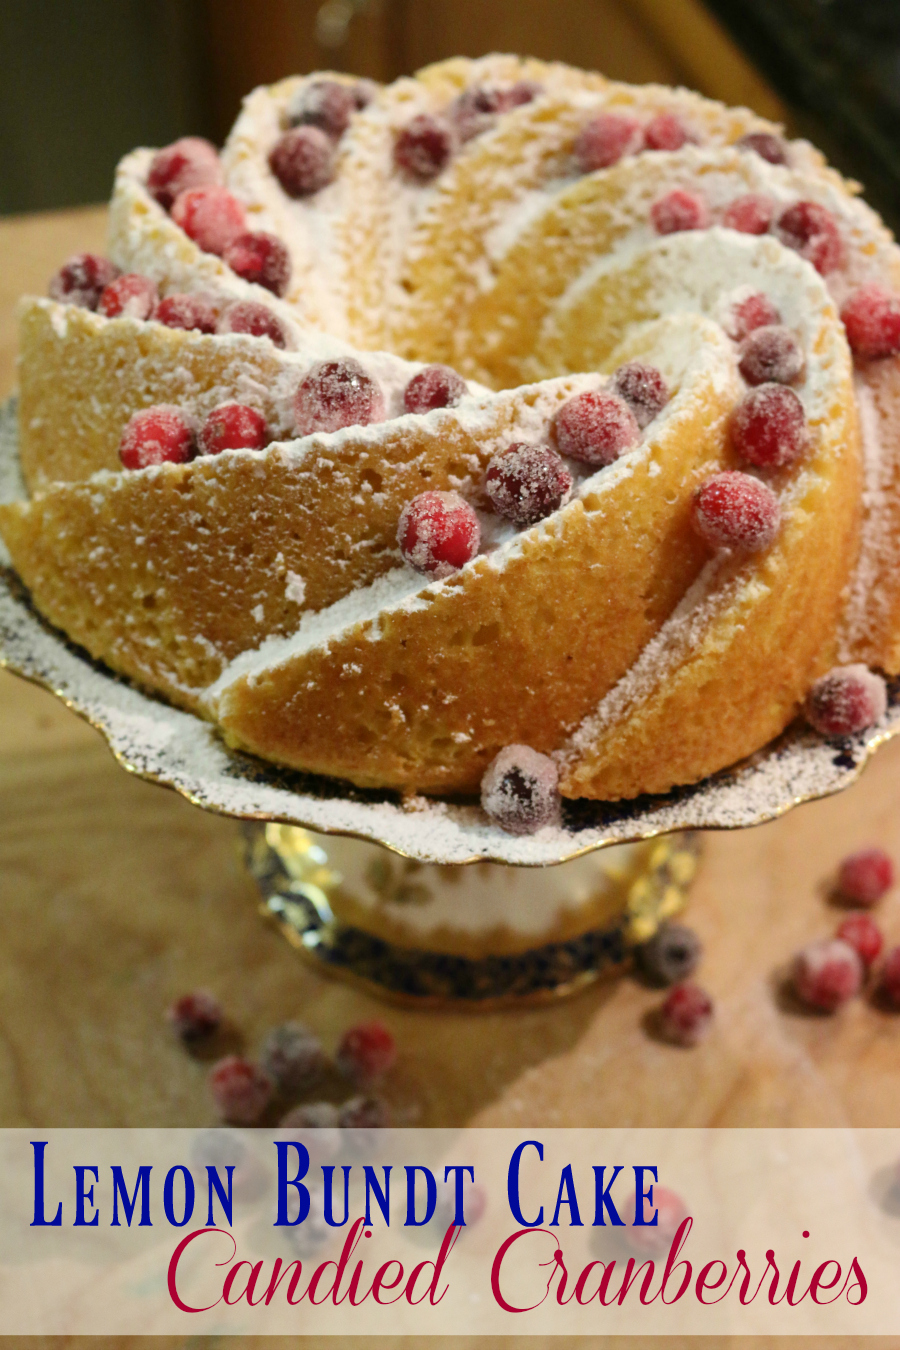 Lemon Bundt Cake with Candied cranberries simply amazing. Little tart berries coated in sugar make them so delicious. And they pair well with the lemon cake.